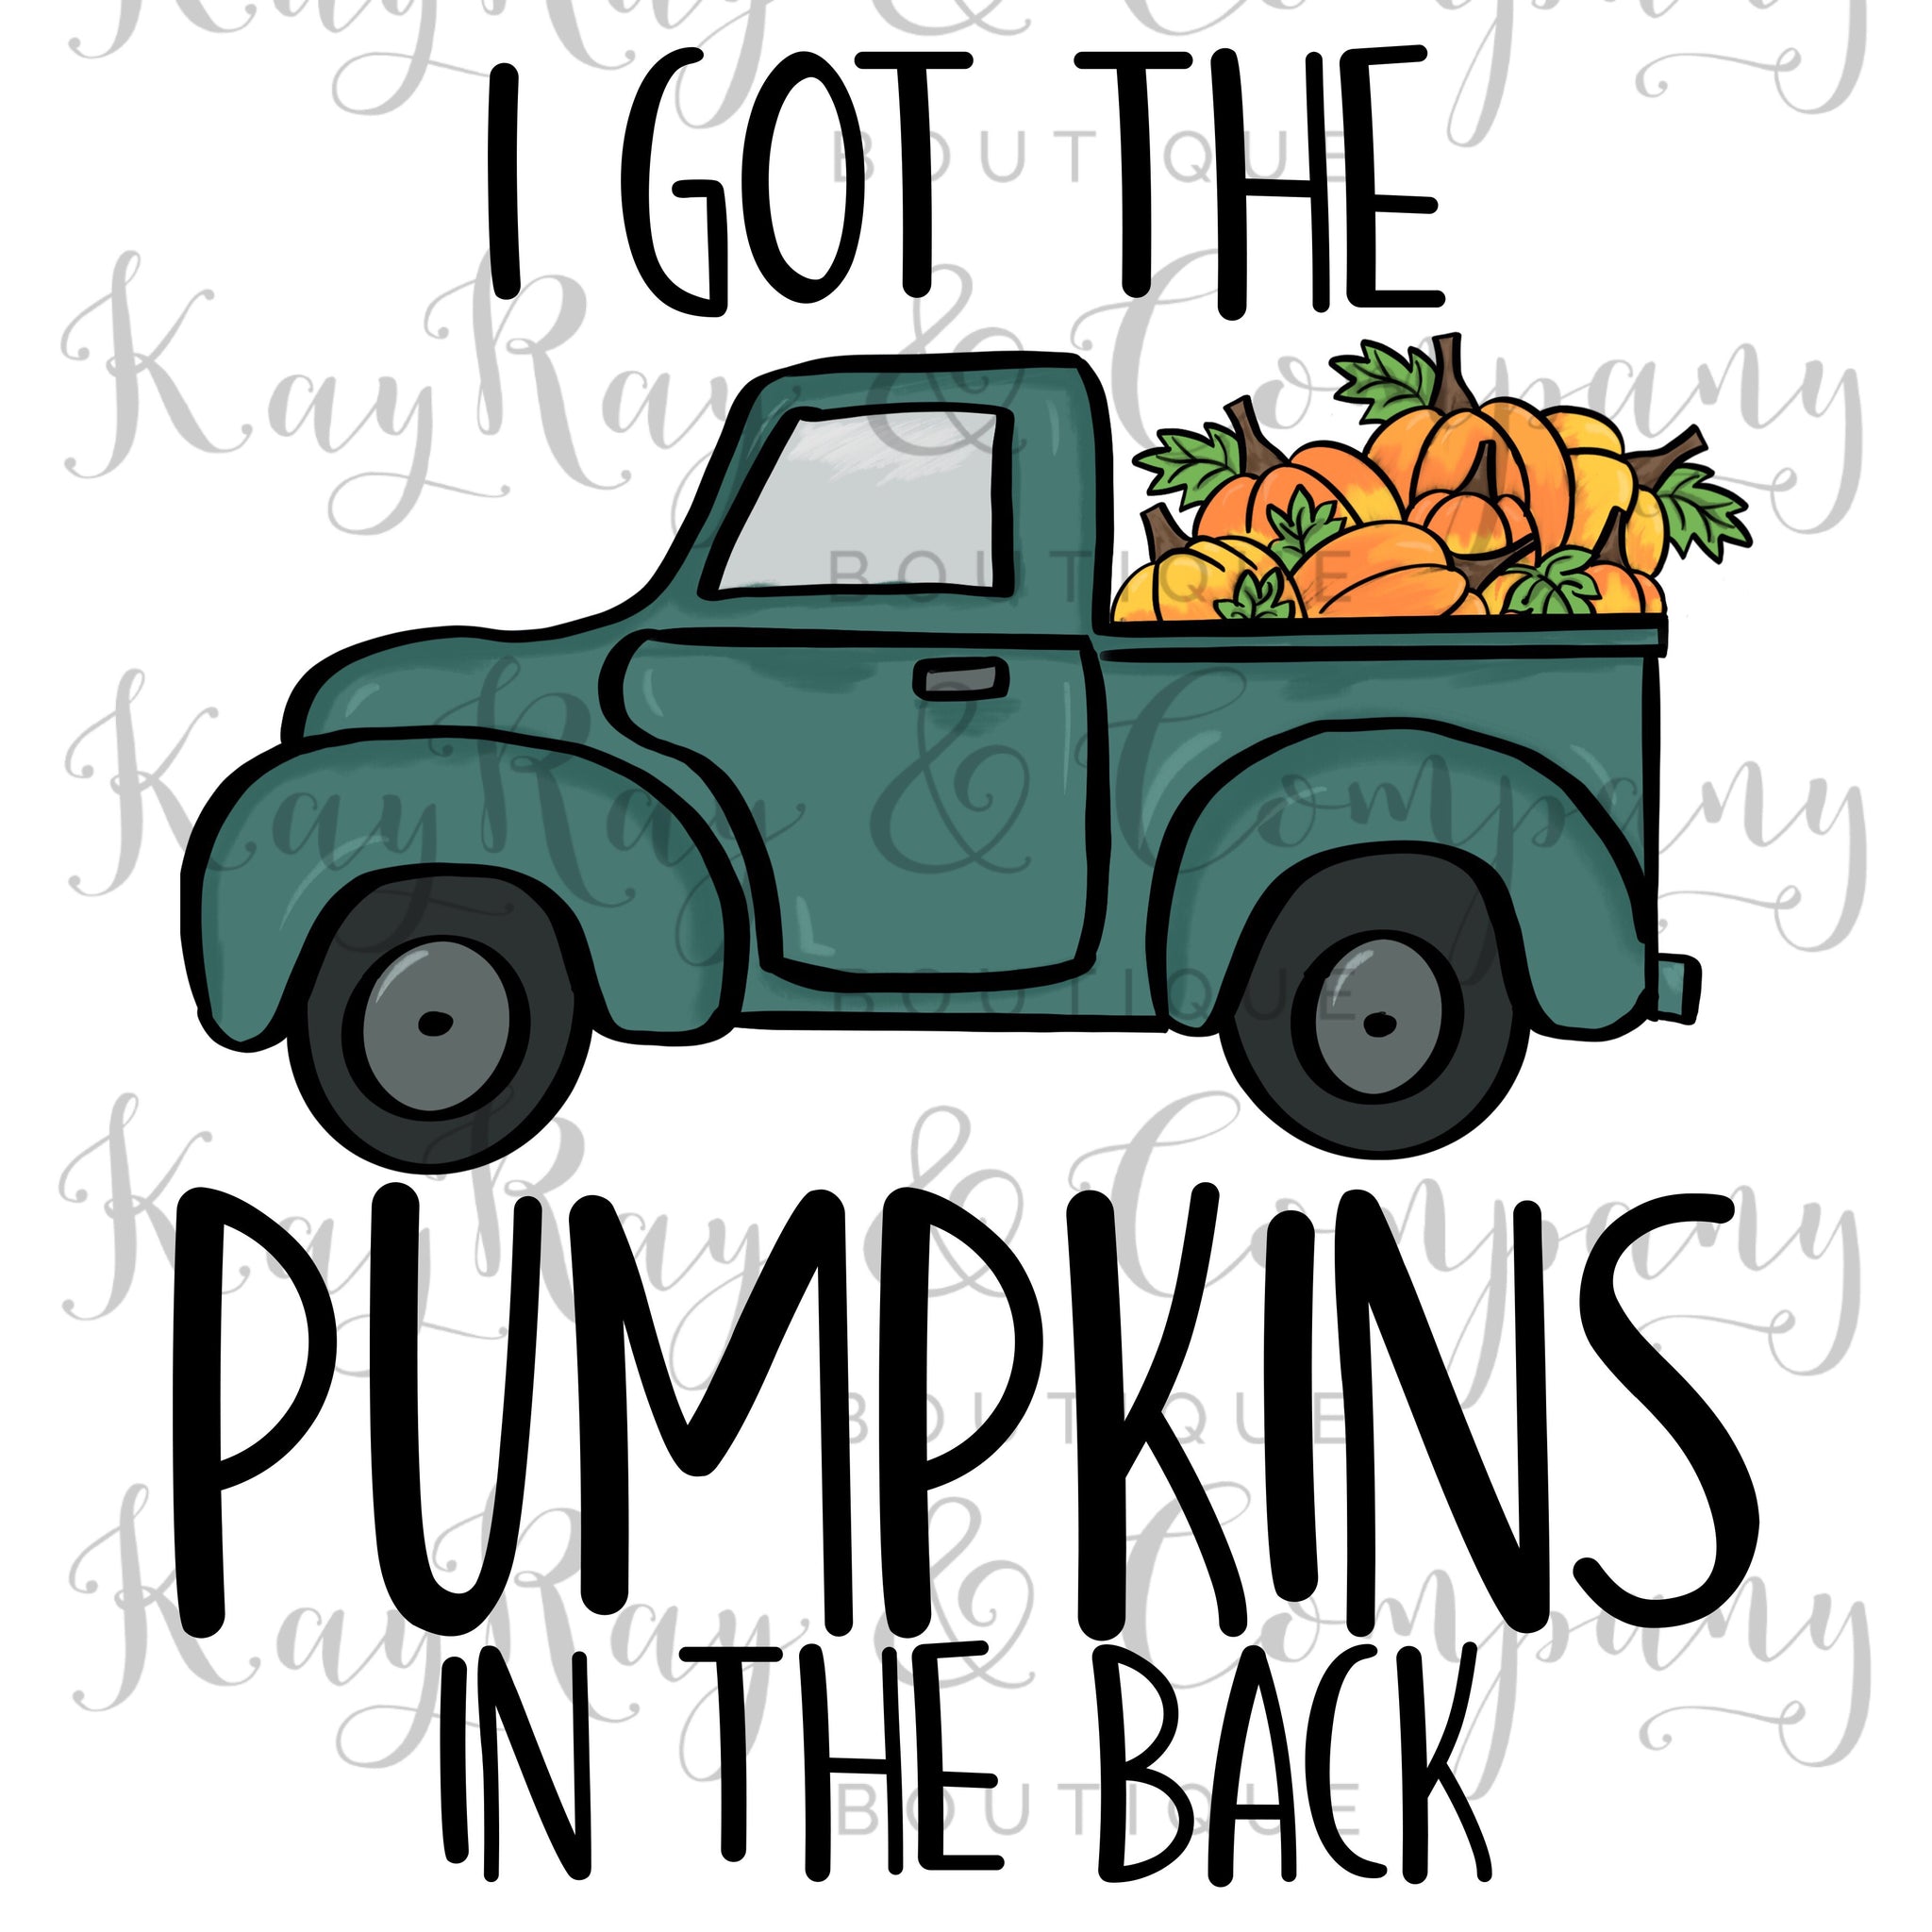 I got the pumpkins in the back truck Sublimation Transfer